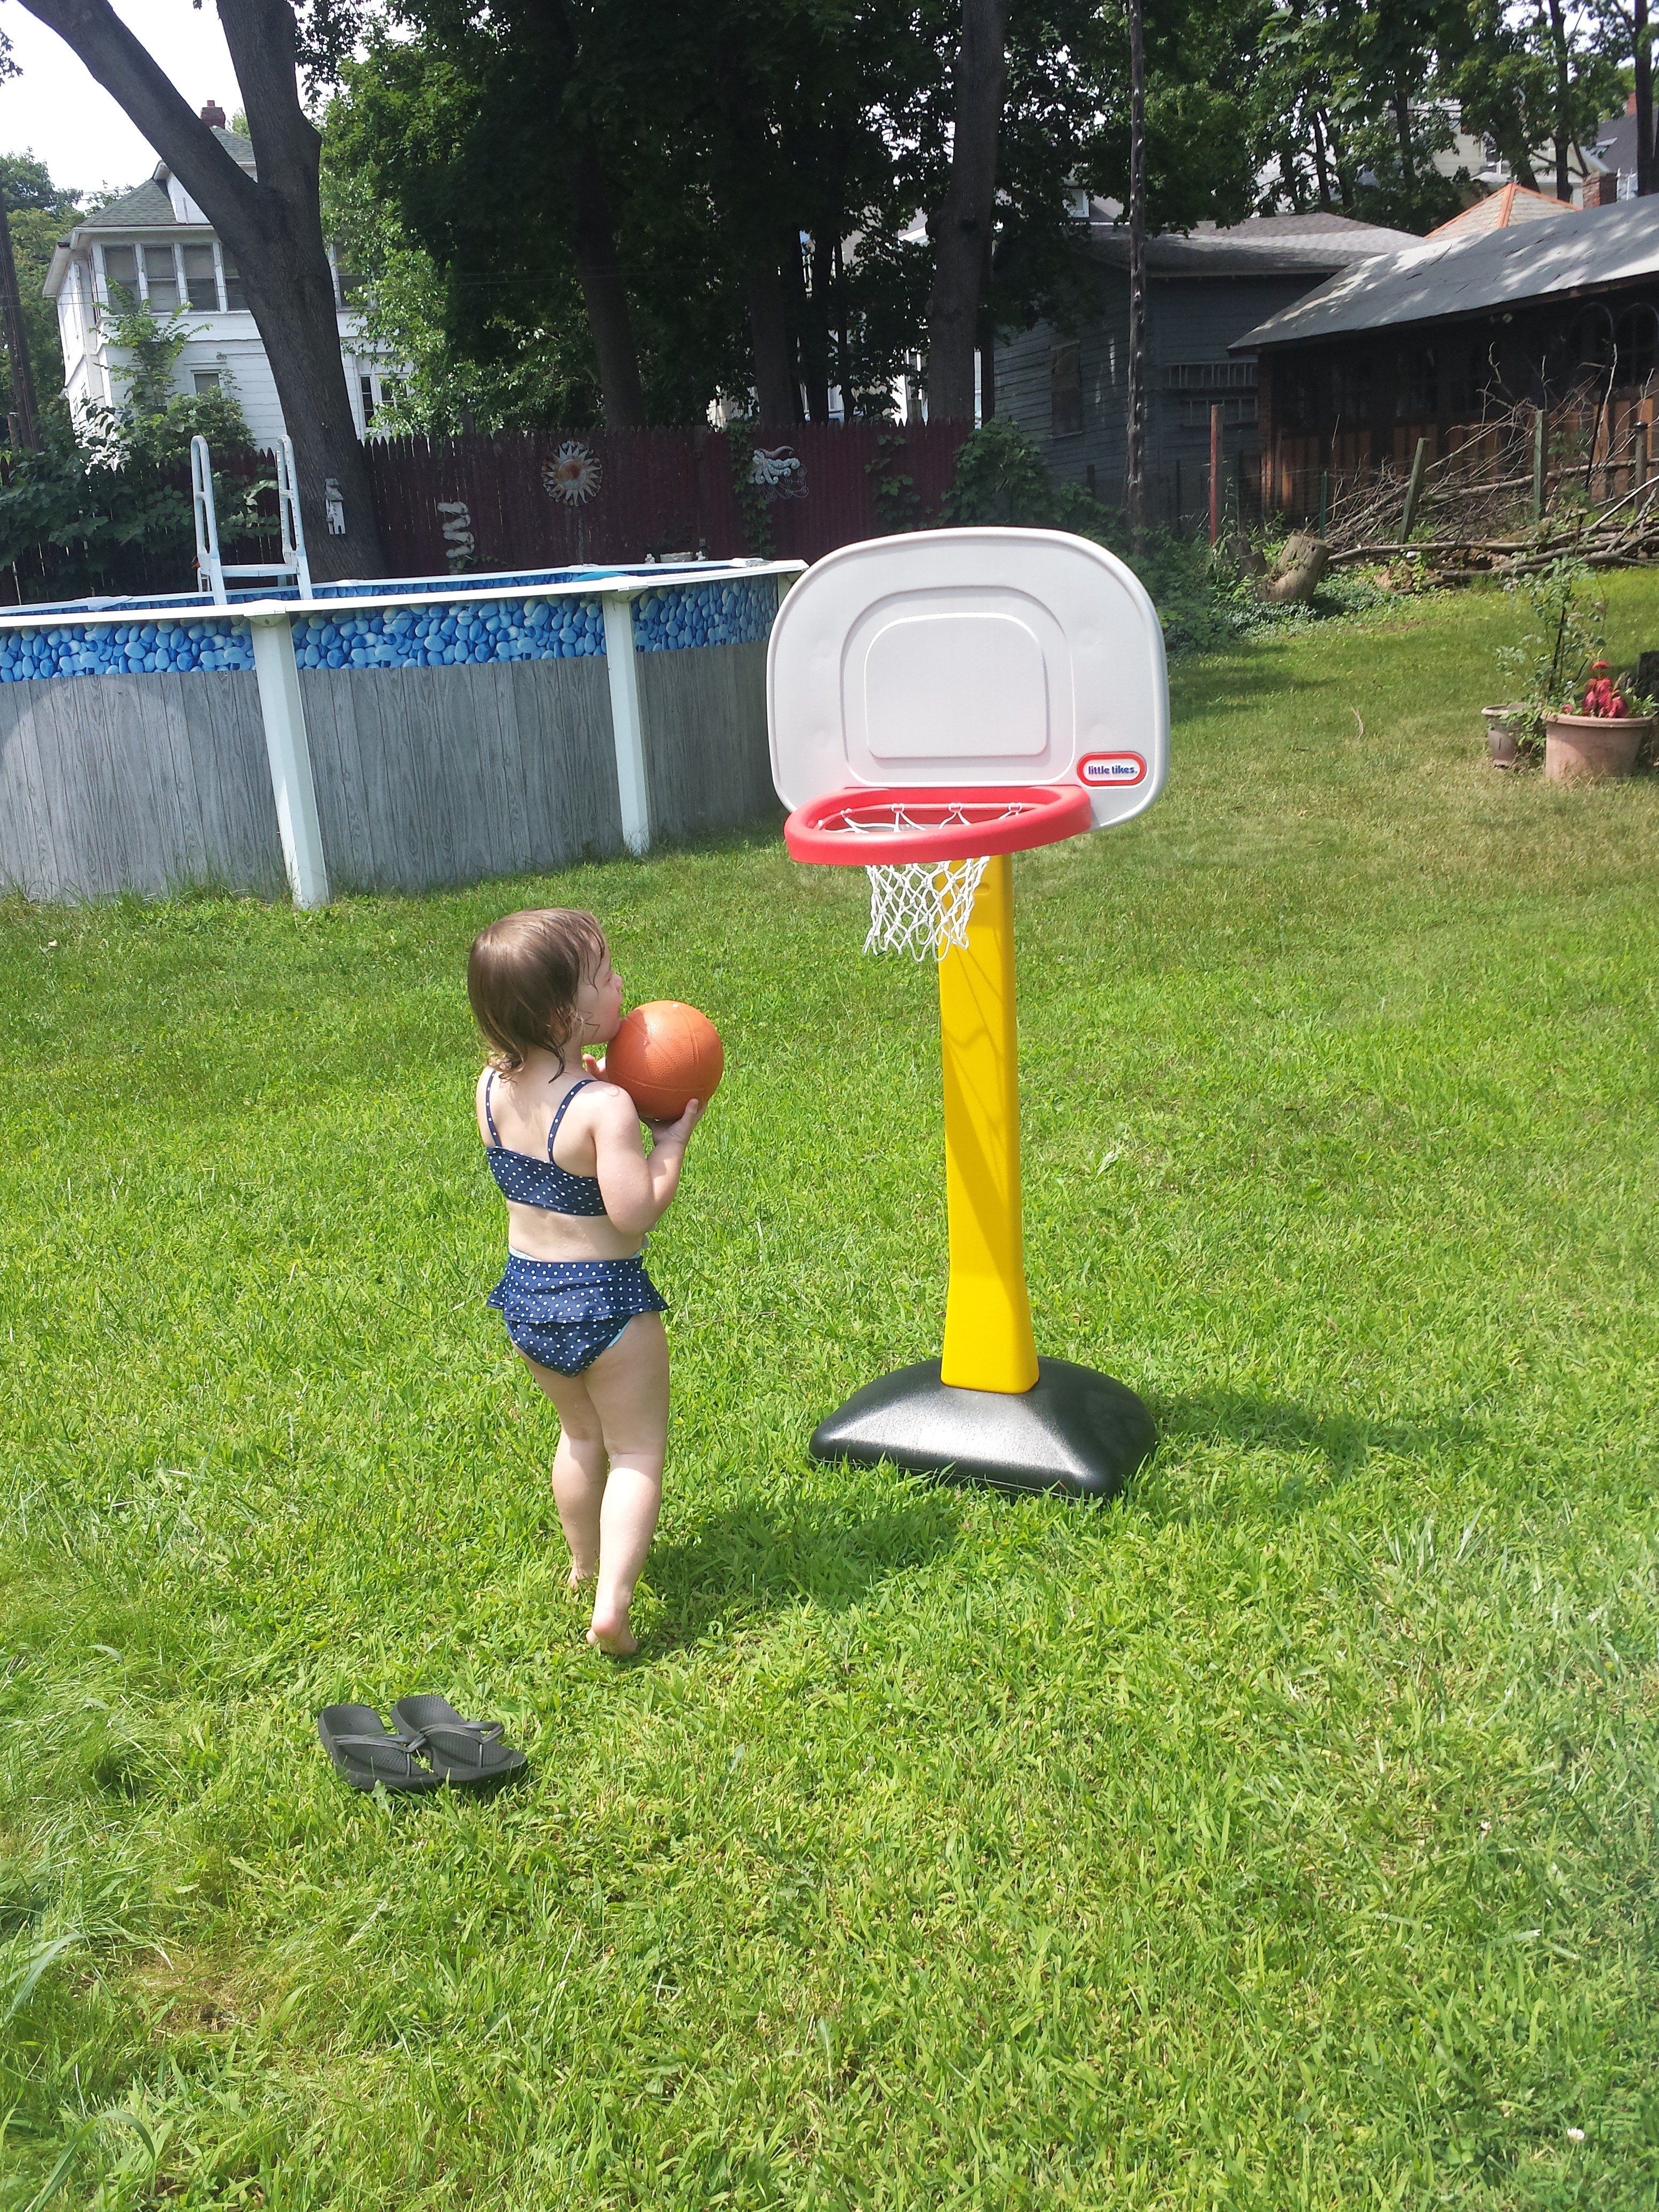 Arianna playing outside